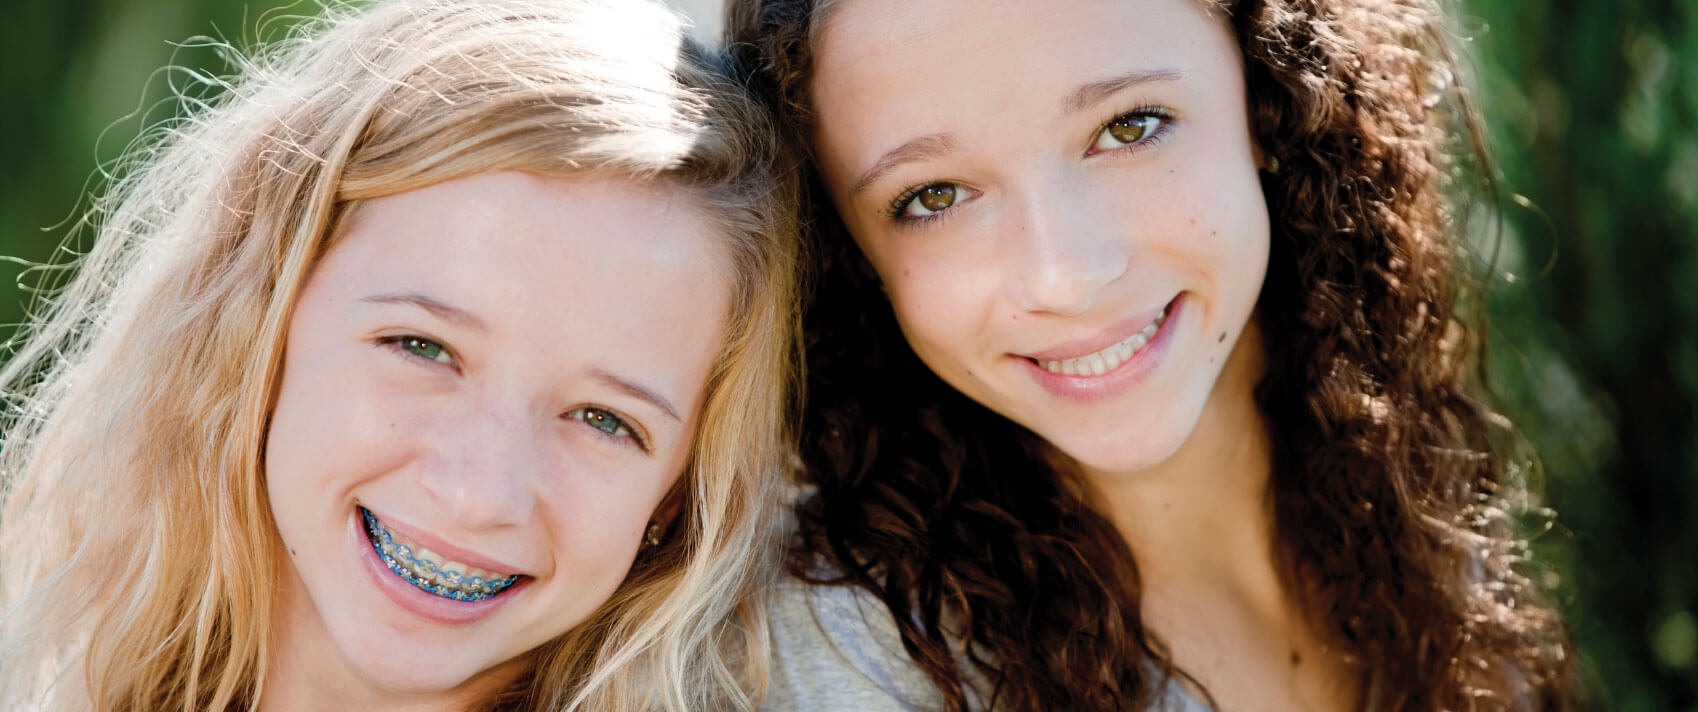 two girls smiling outside